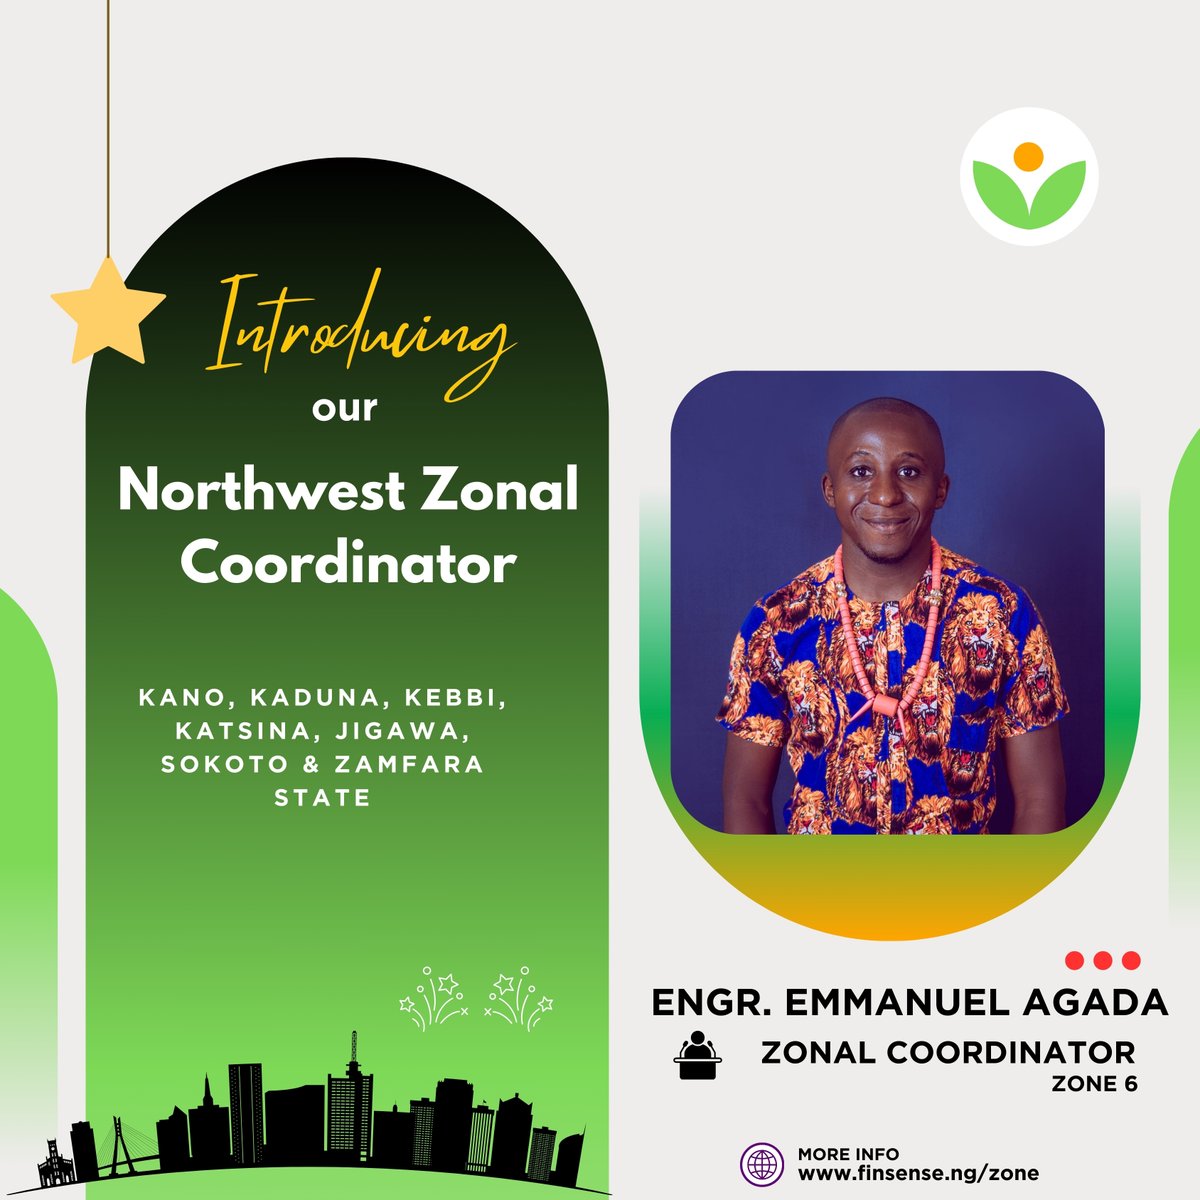 🌐 Exciting news! 🎉 

Congrats to Engr. Emmanuel Agada, co-founder at IMHSystemlinks, on becoming the Northwest Zonal Coordinator (Zone 6) at Finsense Cooperative! 🚀